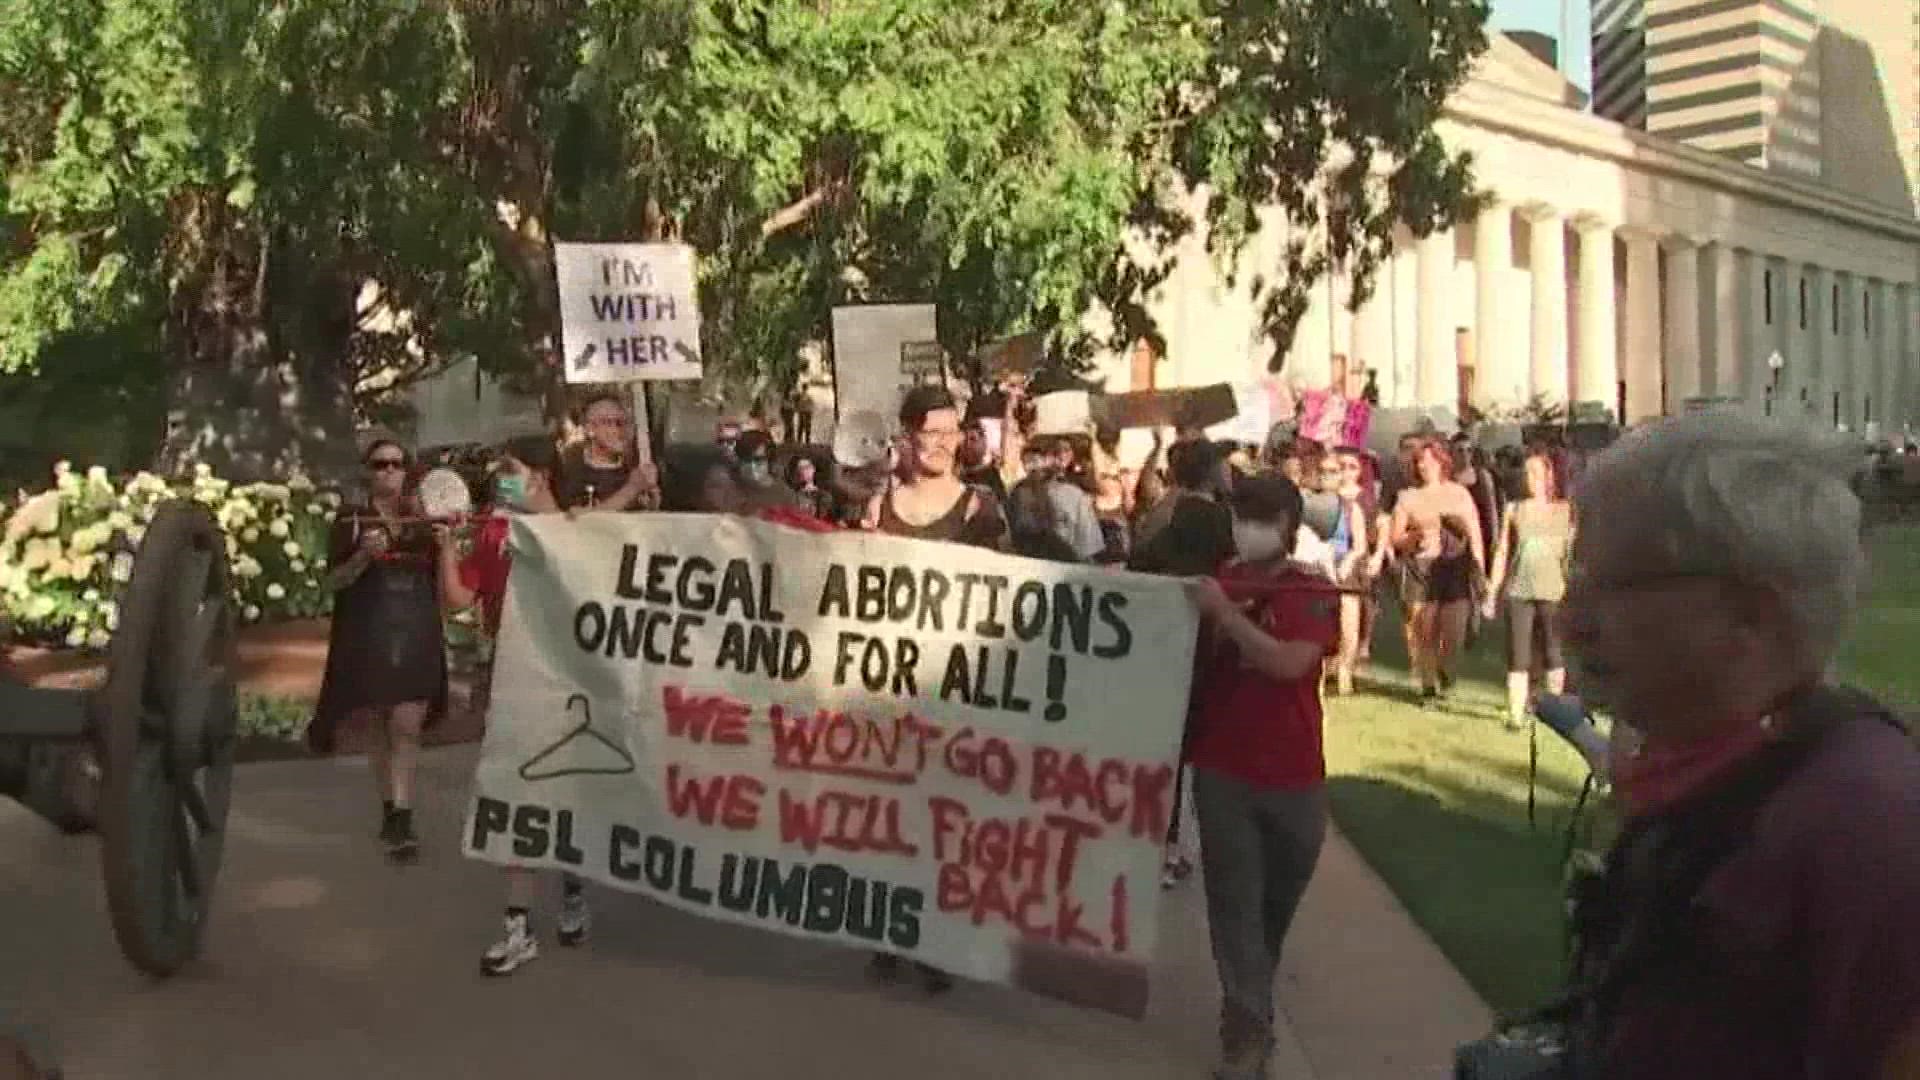 The protestors took to the Statehouse and the streets of downtown Columbus following the Supreme Court ruling on Roe v. Wade.